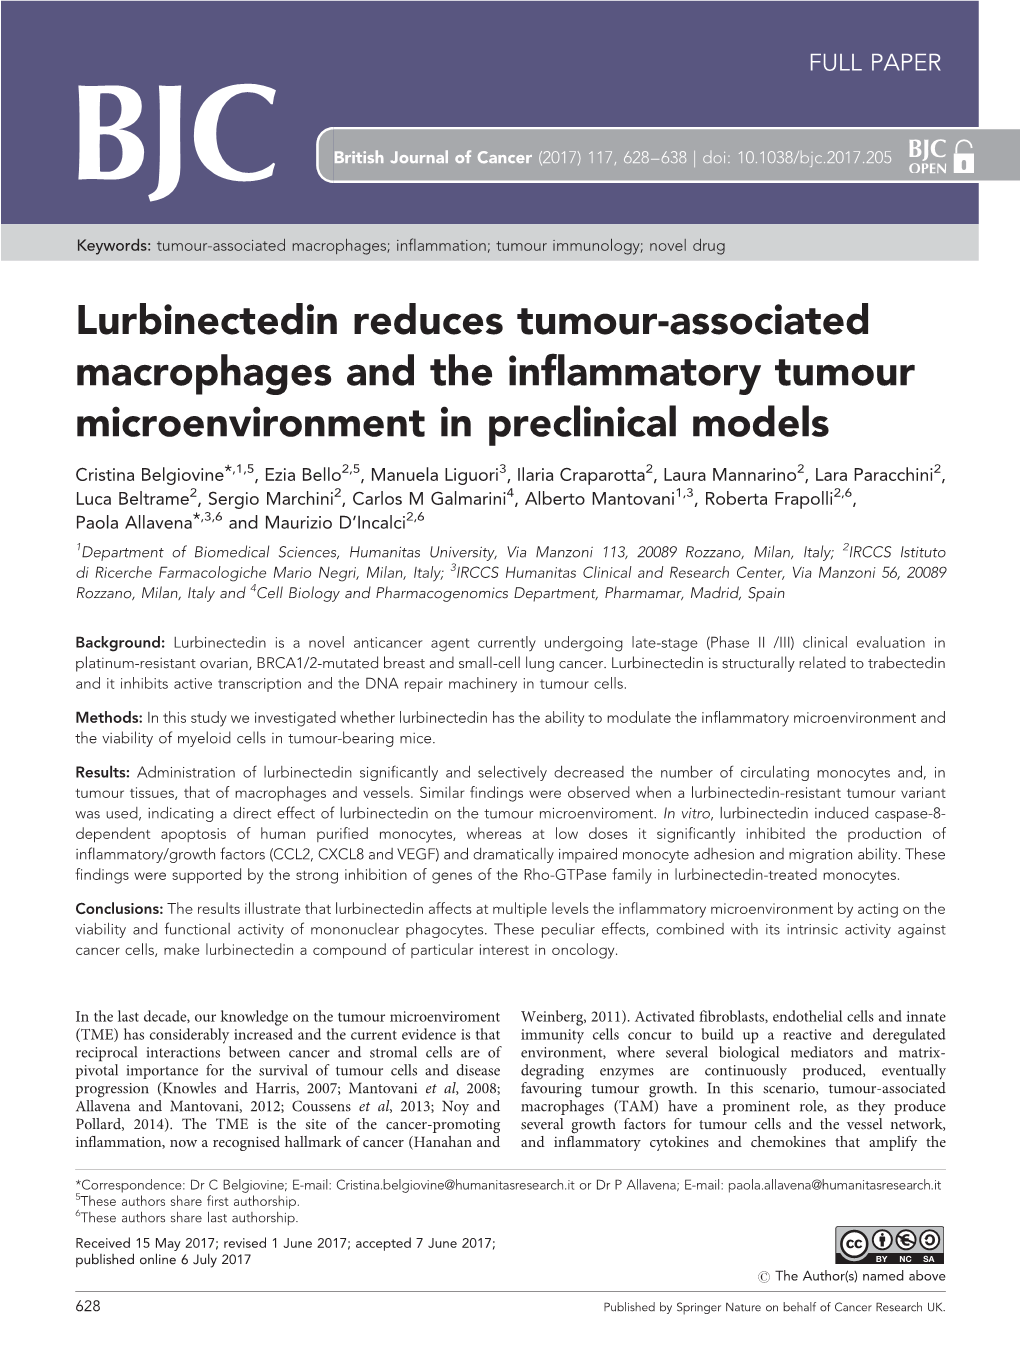 Lurbinectedin Reduces Tumour-Associated Macrophages and the Inflammatory Tumour Microenvironment in Preclinical Models